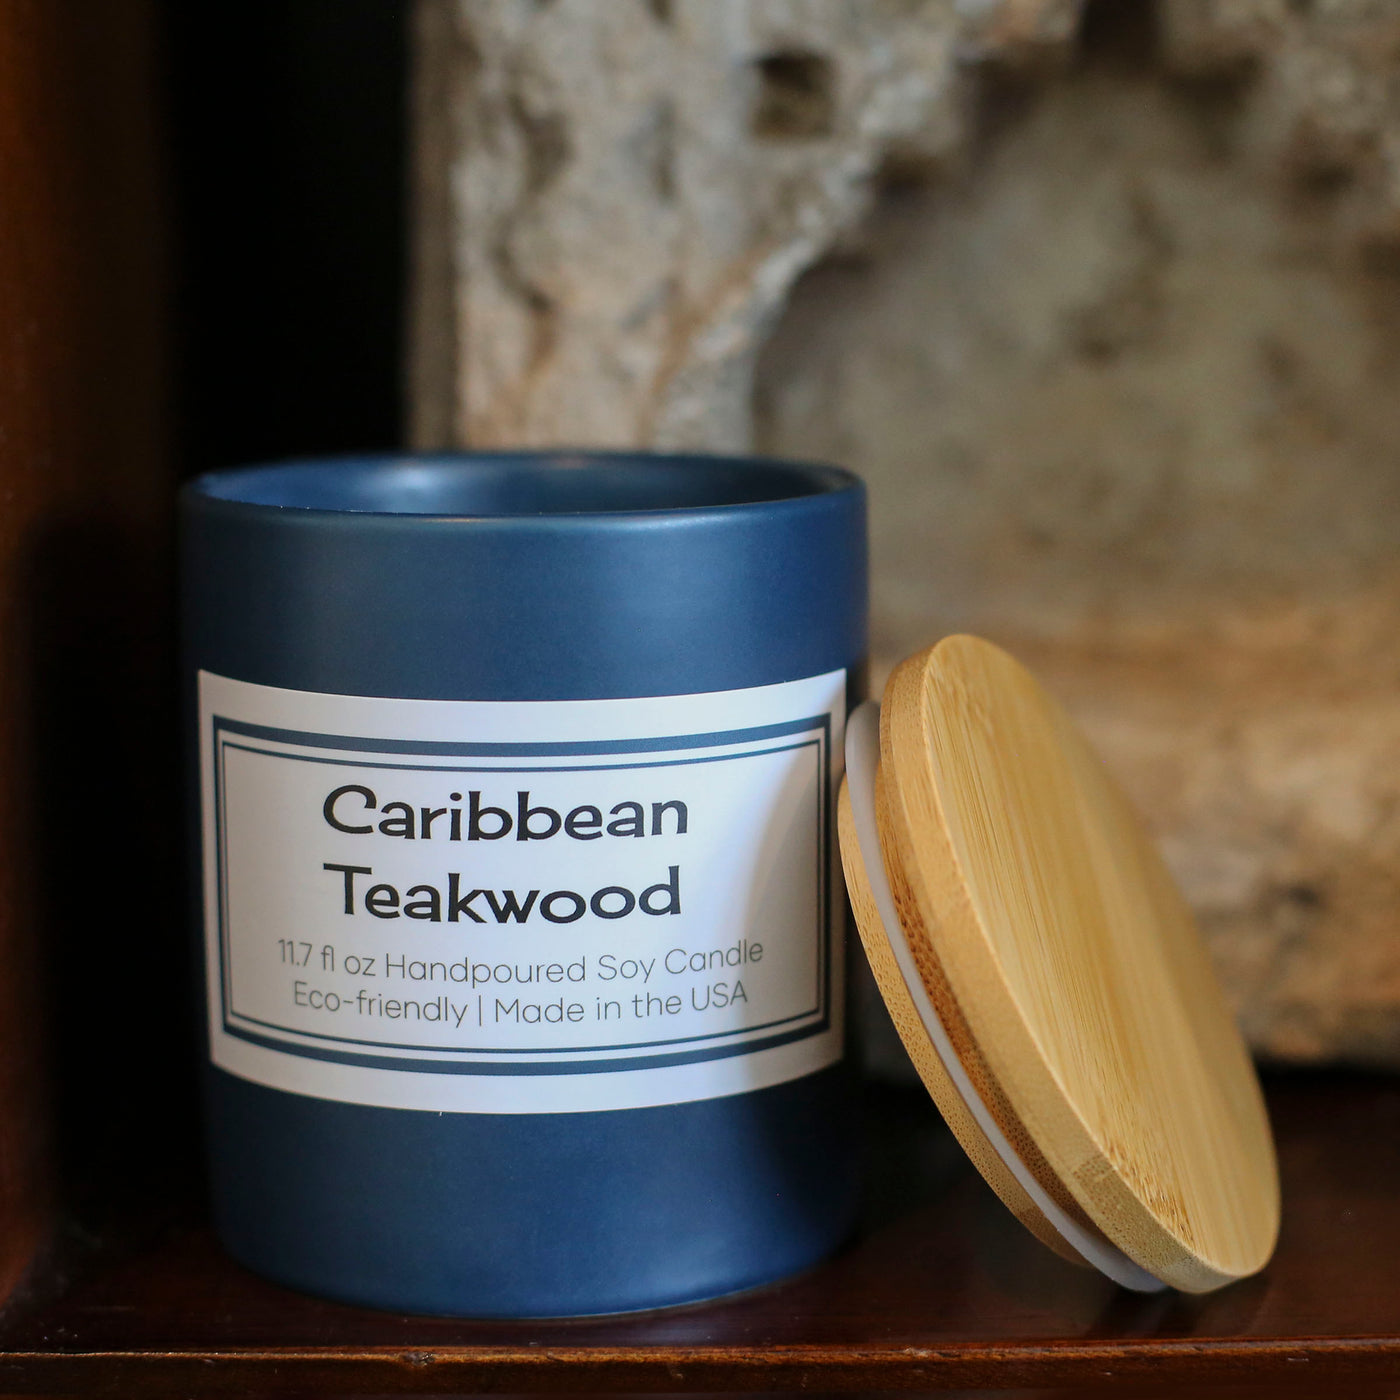 caribbean teakwood mid century modern masculine slate blue matte vessel hand poured eco friendly soy candle. Made in the USA 